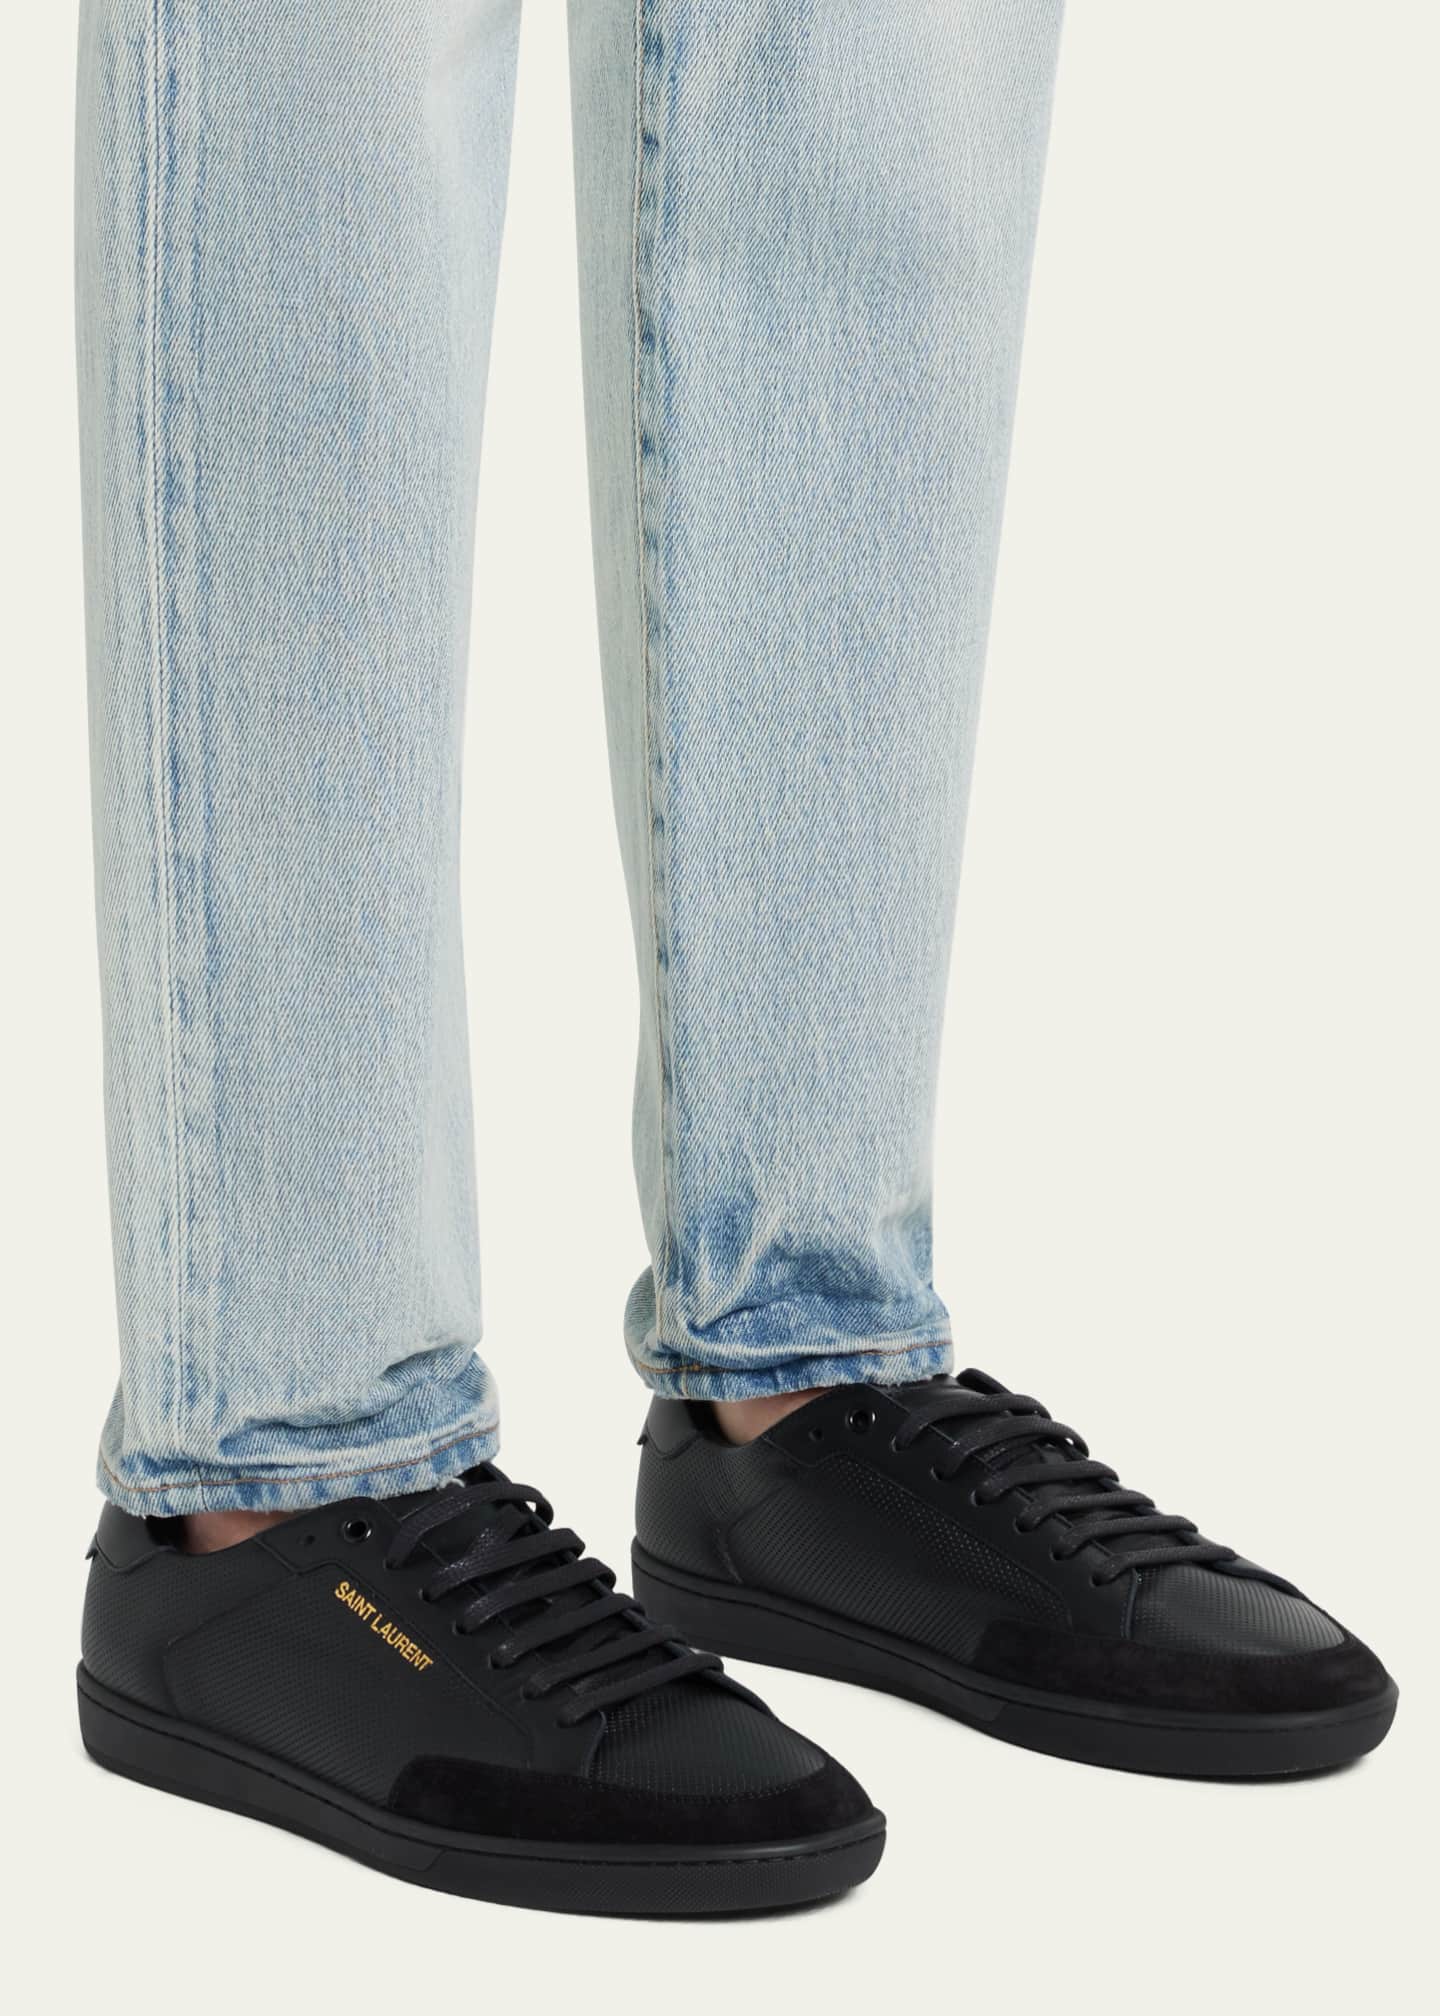 Saint Laurent Men's SL/10 Court Classic Perforated Leather Sneakers Image 2 of 5